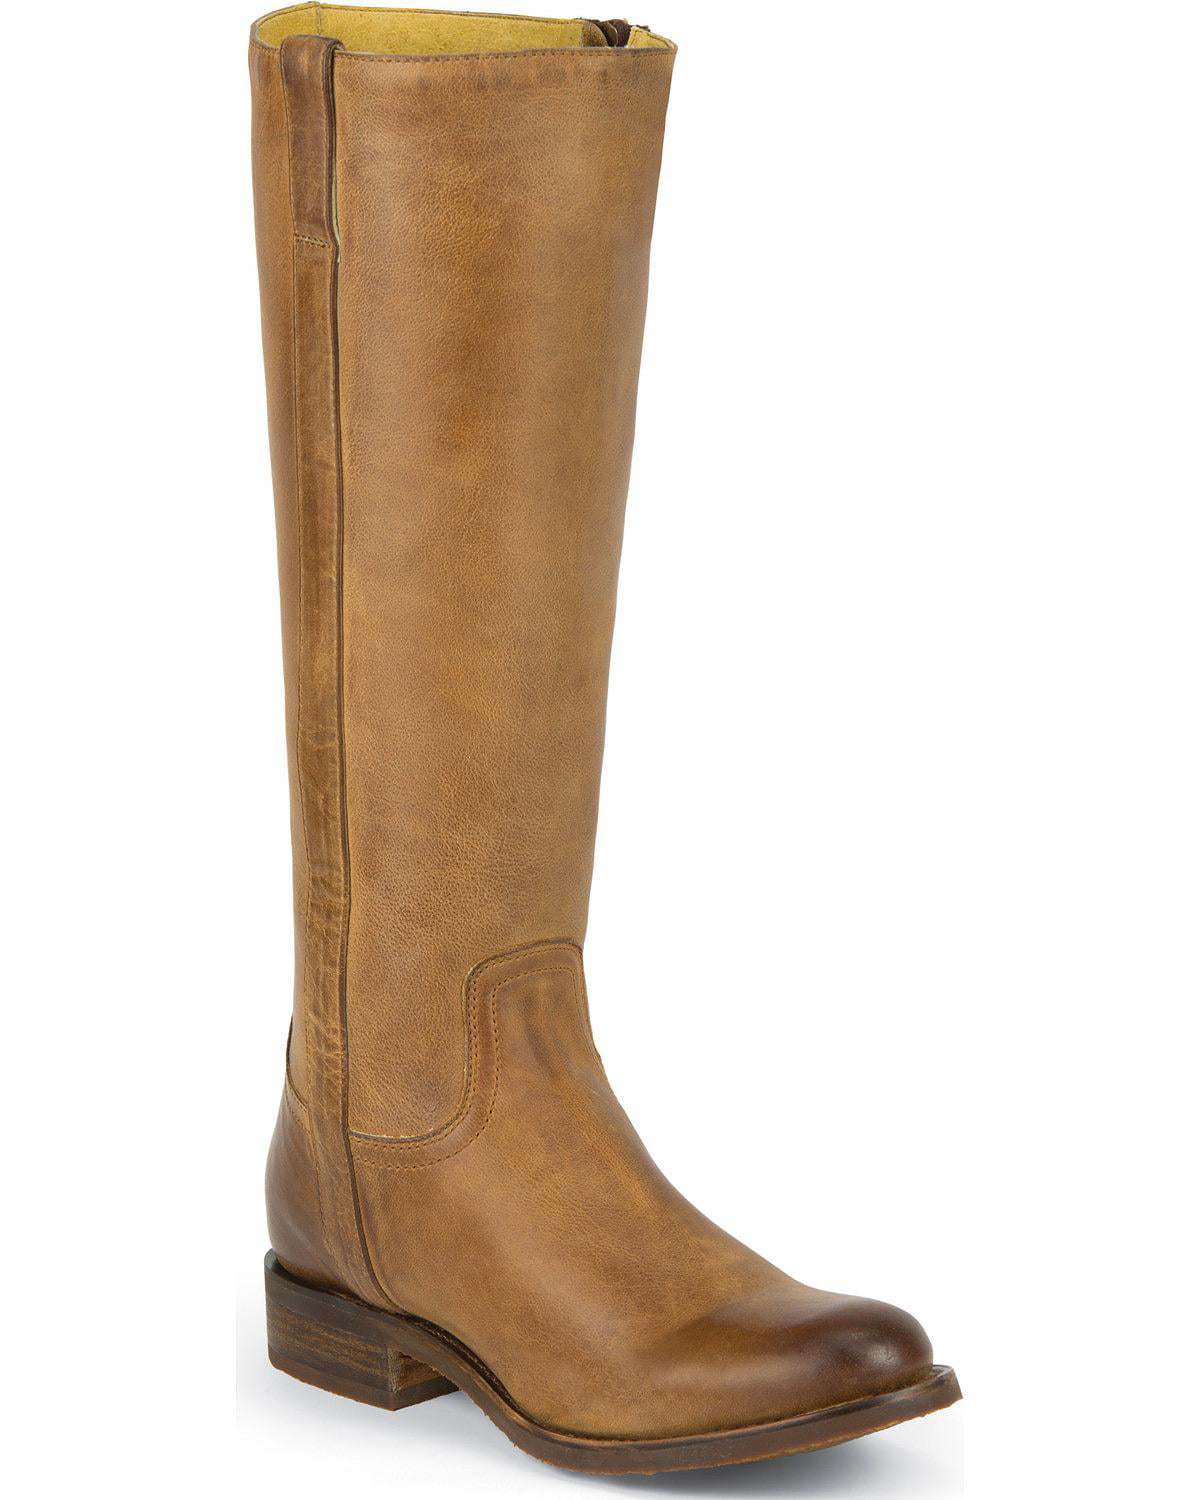 Justin Women's Tall Leather Riding Boot Round Toe - Msl502 - Walmart.com